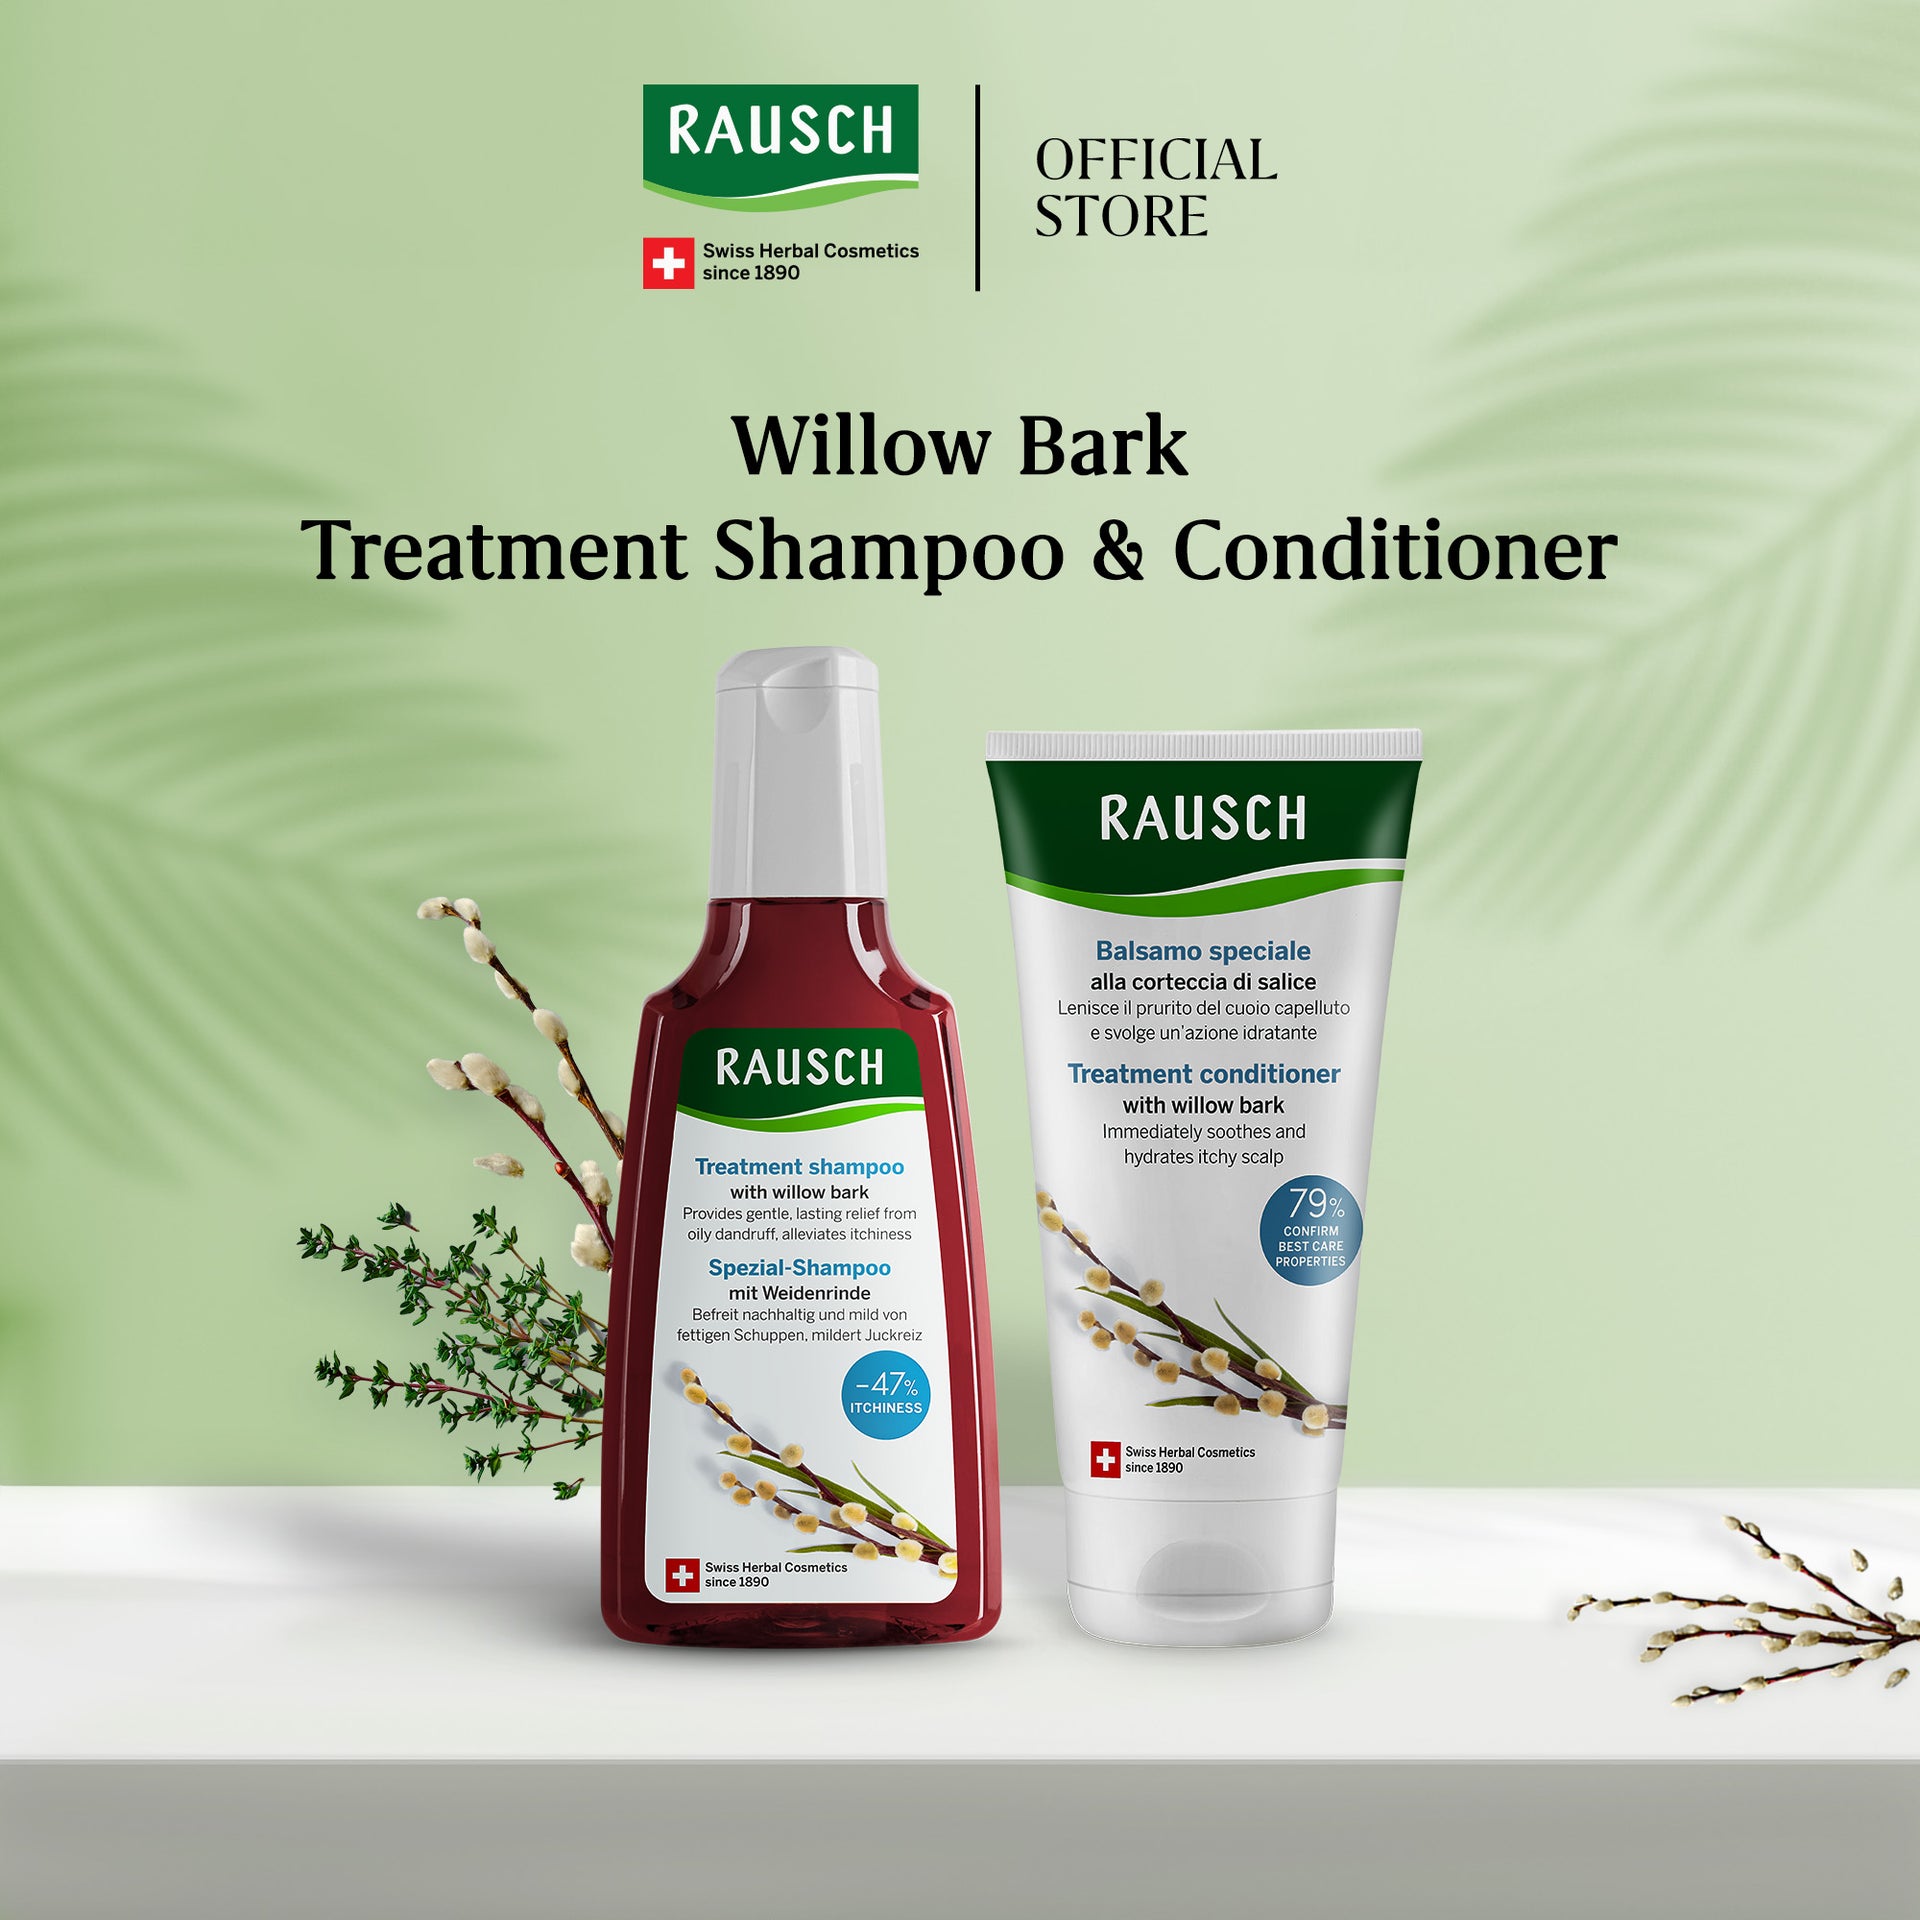 Treatment shampoo & Conditioner with willow bark (Travel Size)